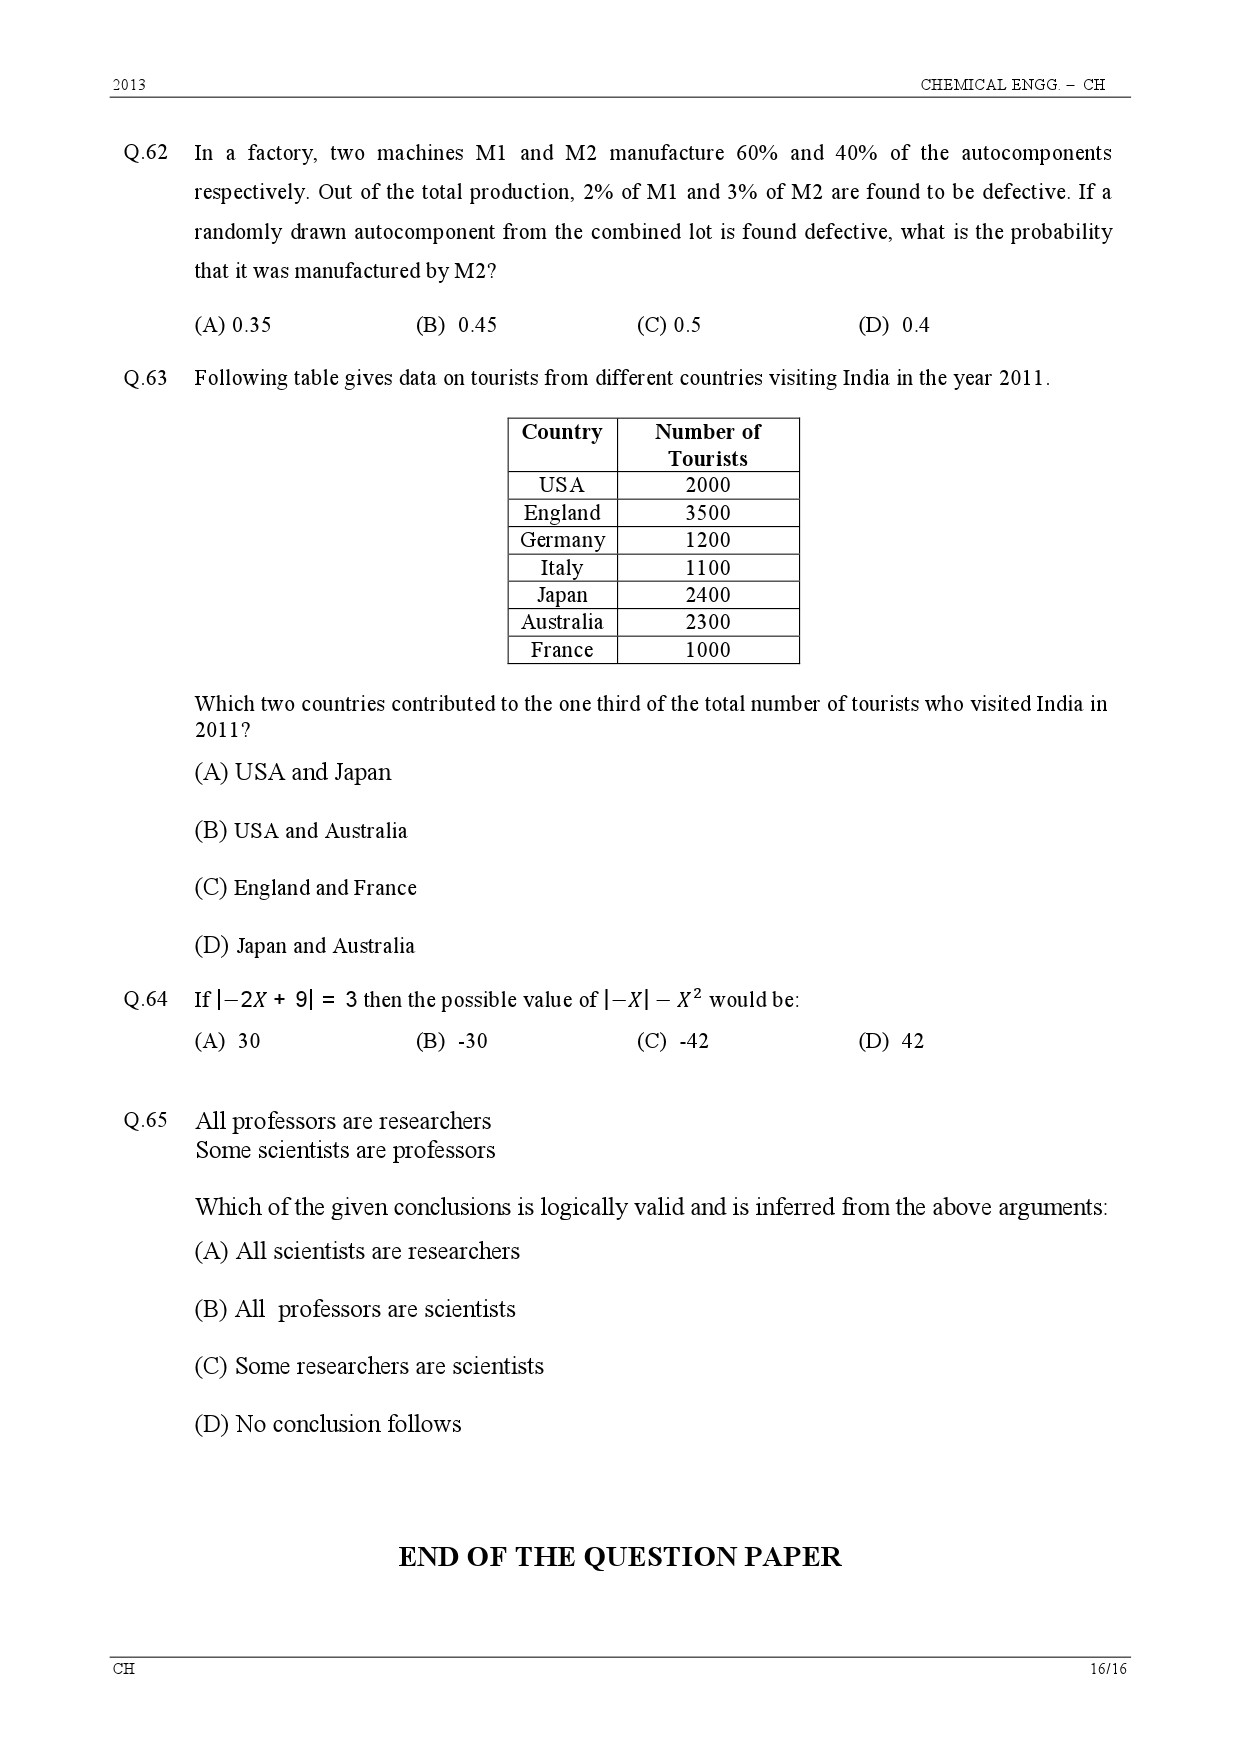 GATE Exam Question Paper 2013 Chemical Engineering 16